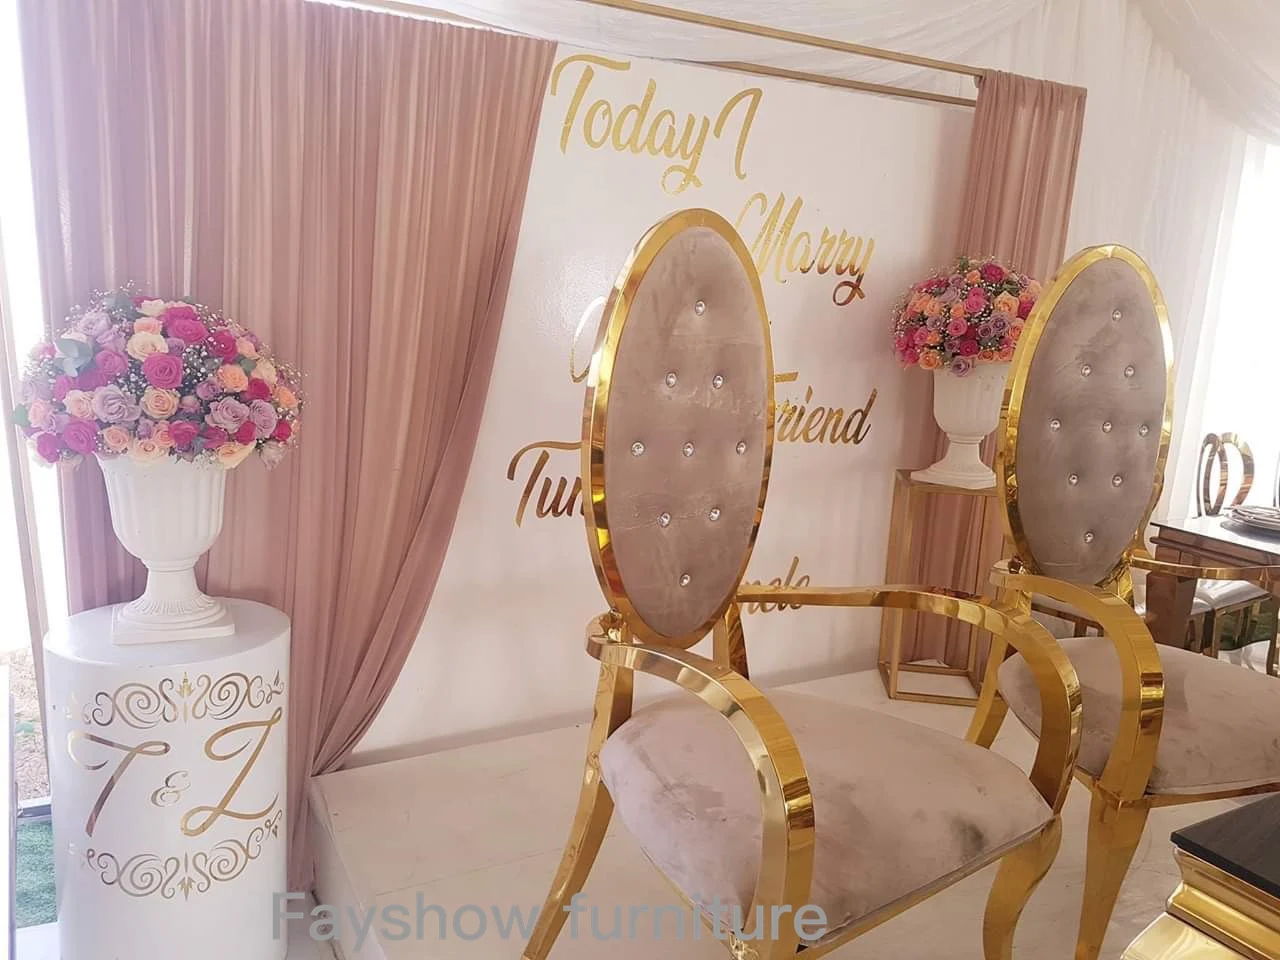 royal wedding king throne armrest banquet chair for sale view wedding king  chair wedding chair product details from foshan fayshow furniture co